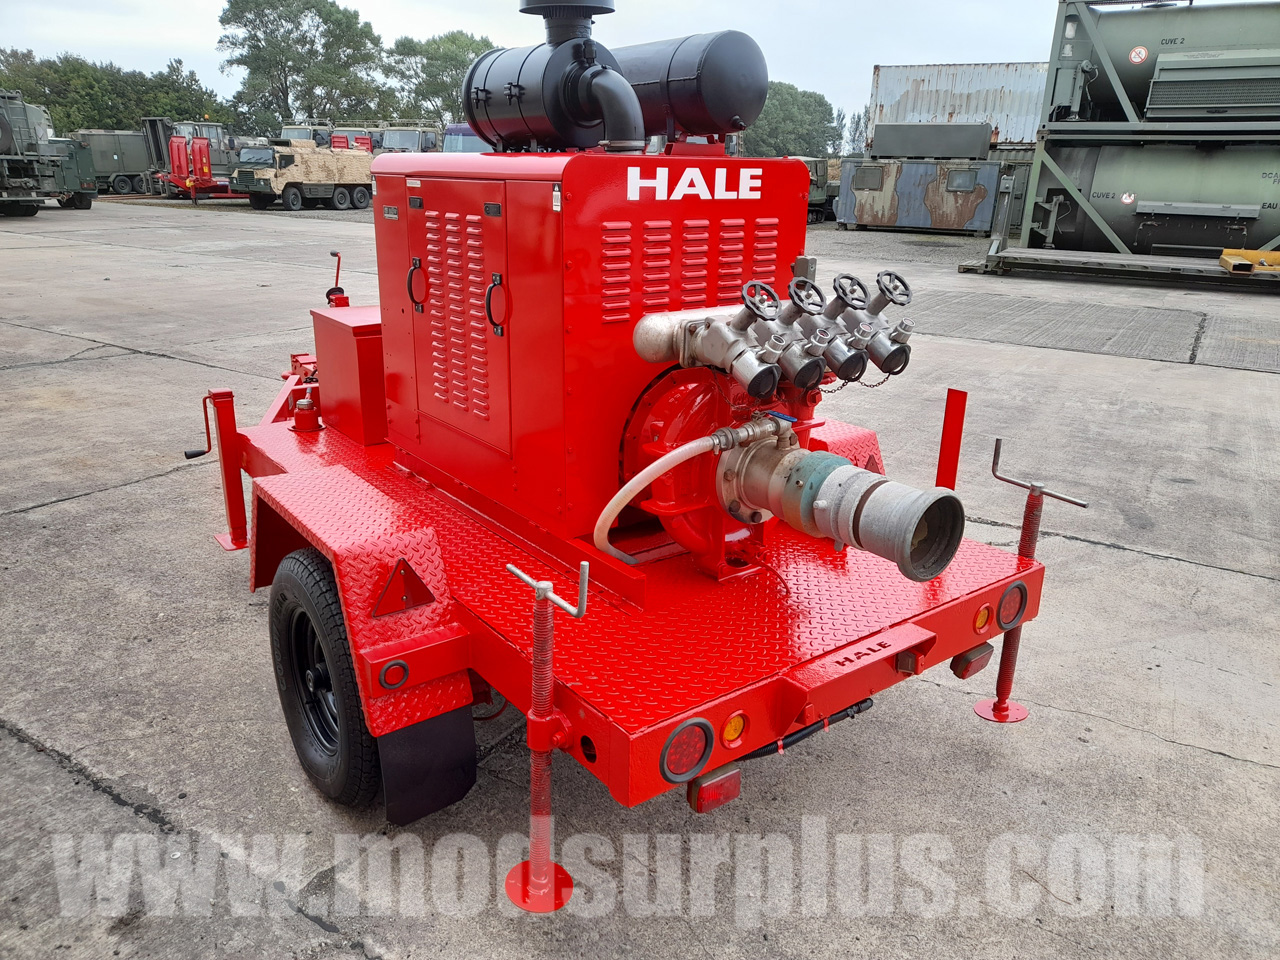 Hale Trailered High Capacity Fire Pump - Govsales of ex military vehicles for sale, mod surplus